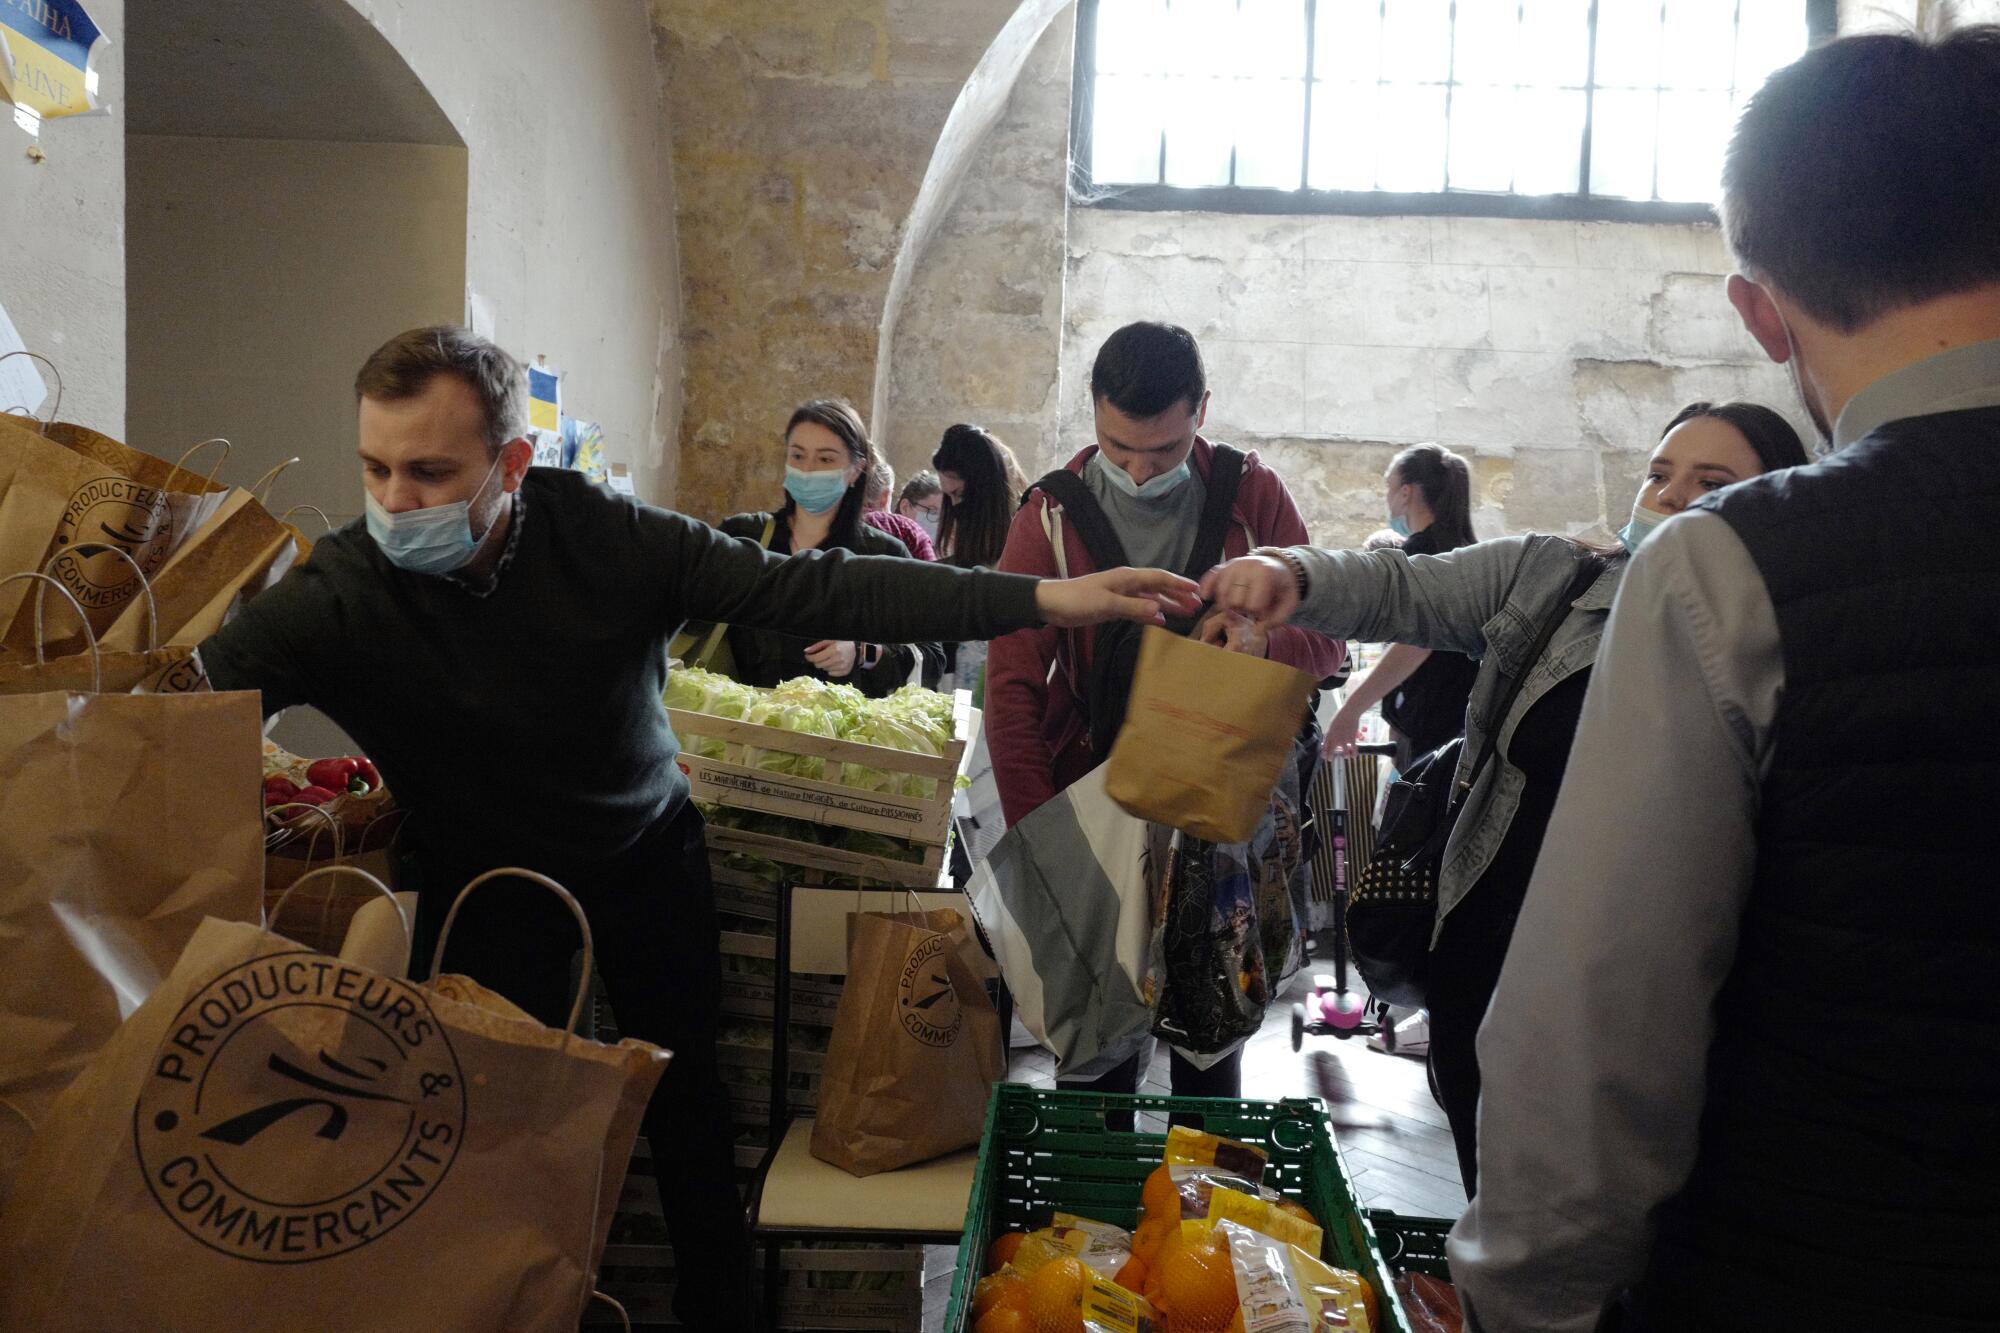 Volunteer pass out bags of food and clothing to Ukraine refugees.